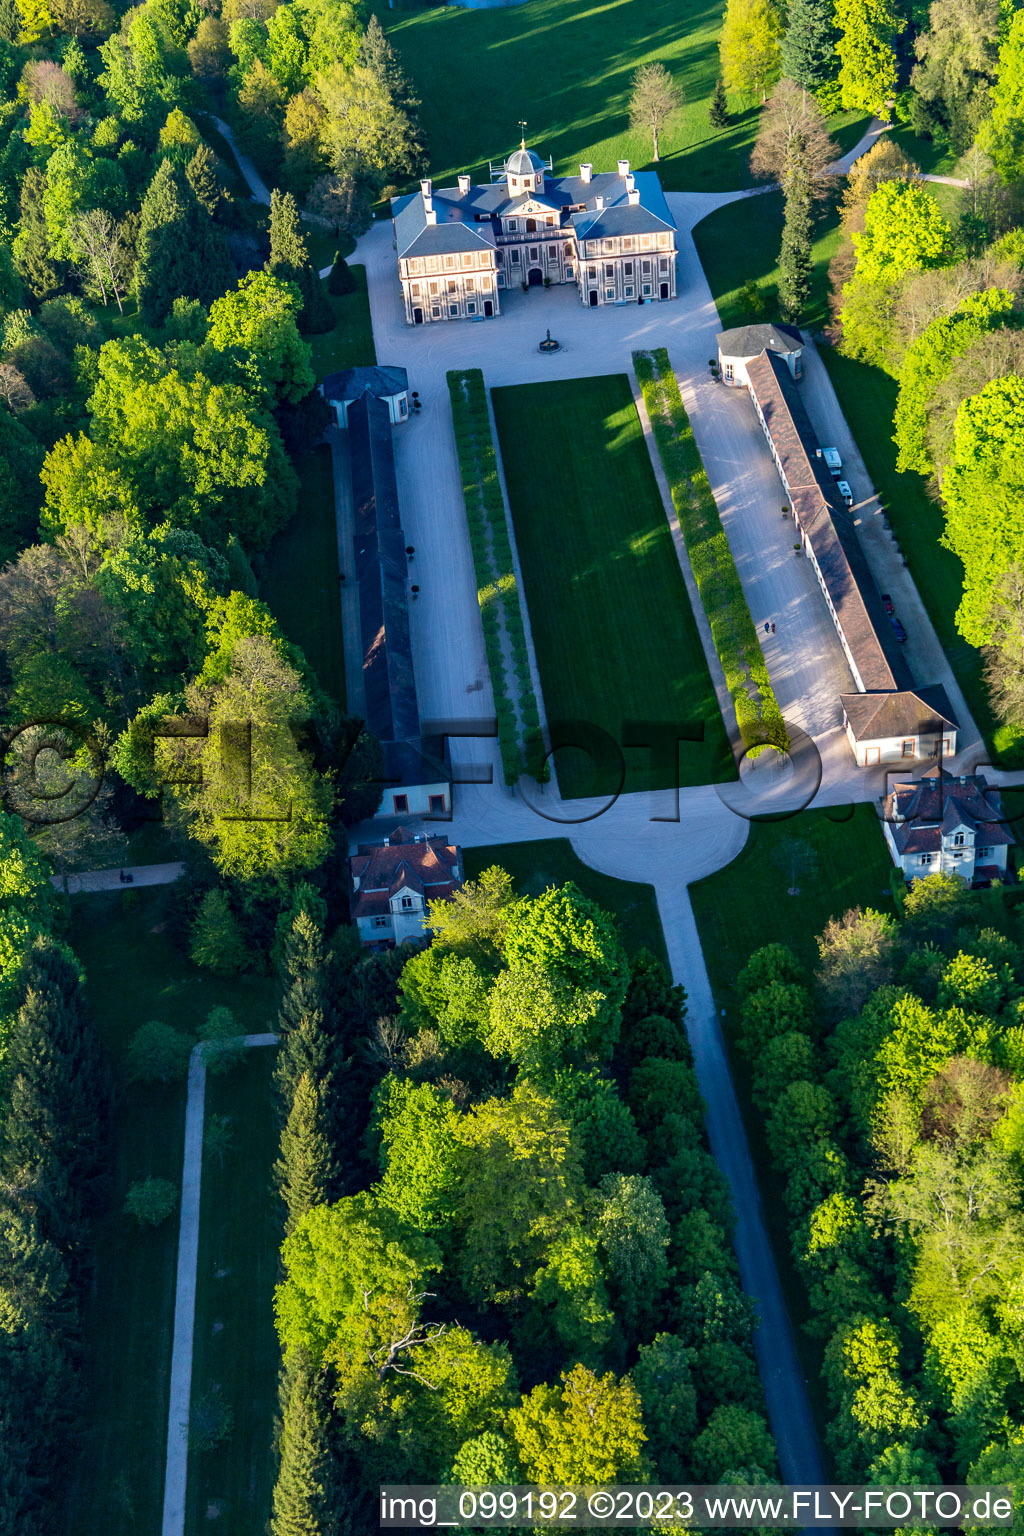 Locked Favorite at Förch in the district Förch in Rastatt in the state Baden-Wuerttemberg, Germany from a drone